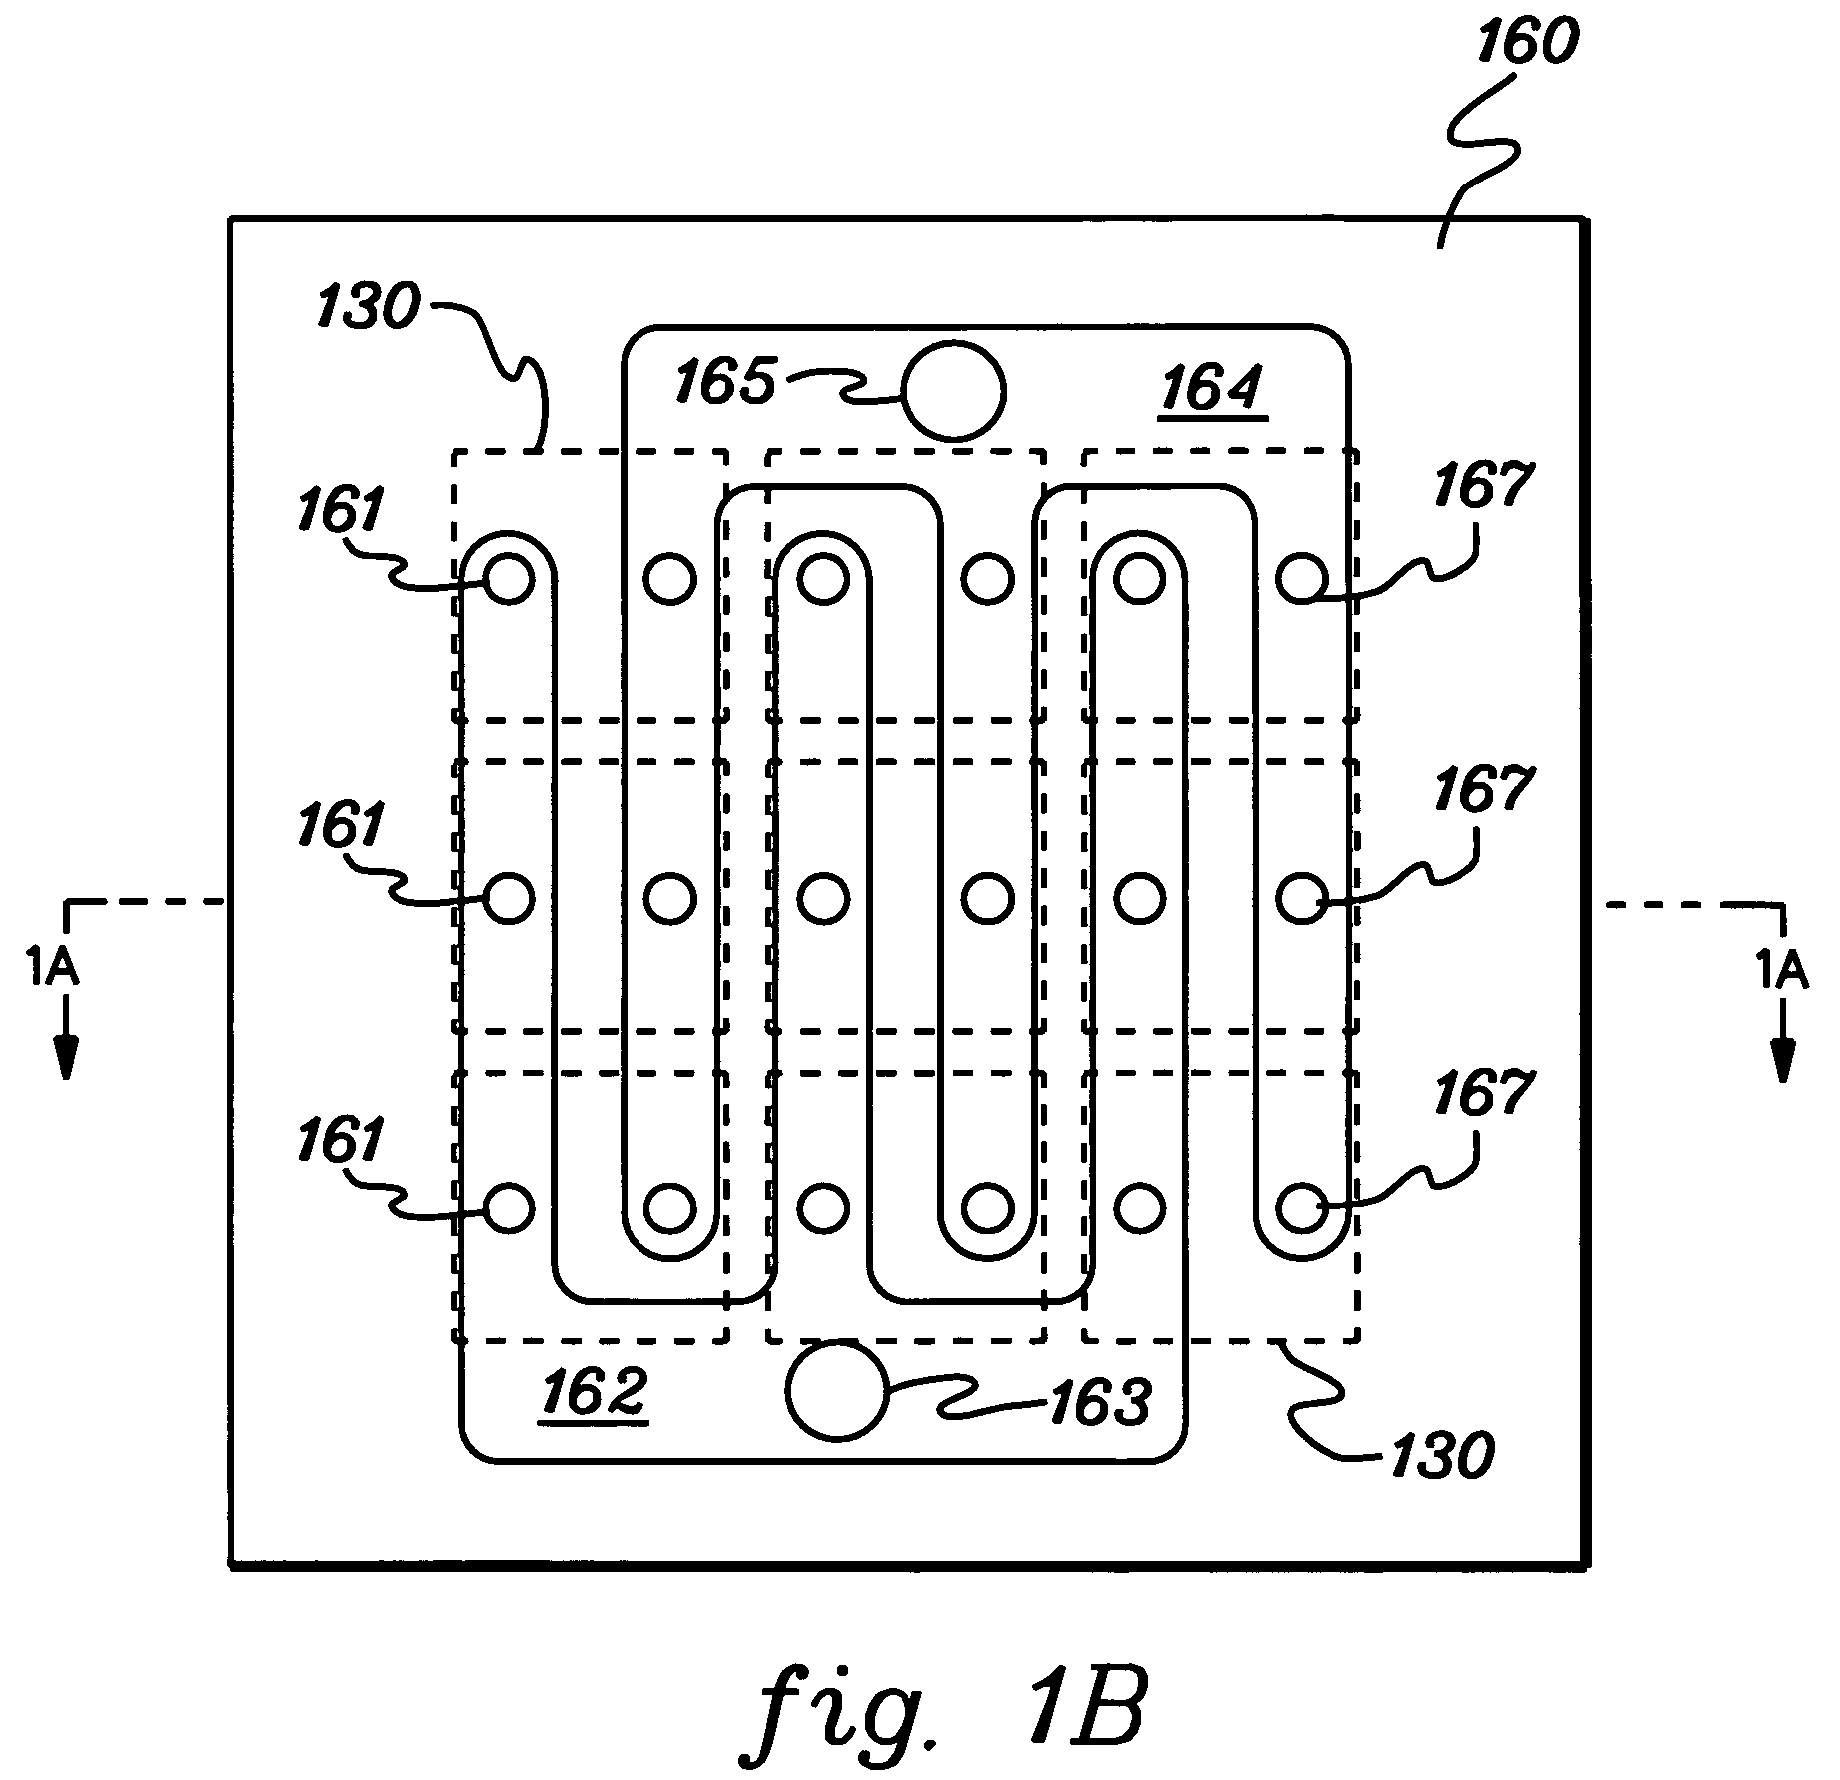 Cooling apparatus and method employing discrete cold plates disposed between a module enclosure and electronics components to be cooled